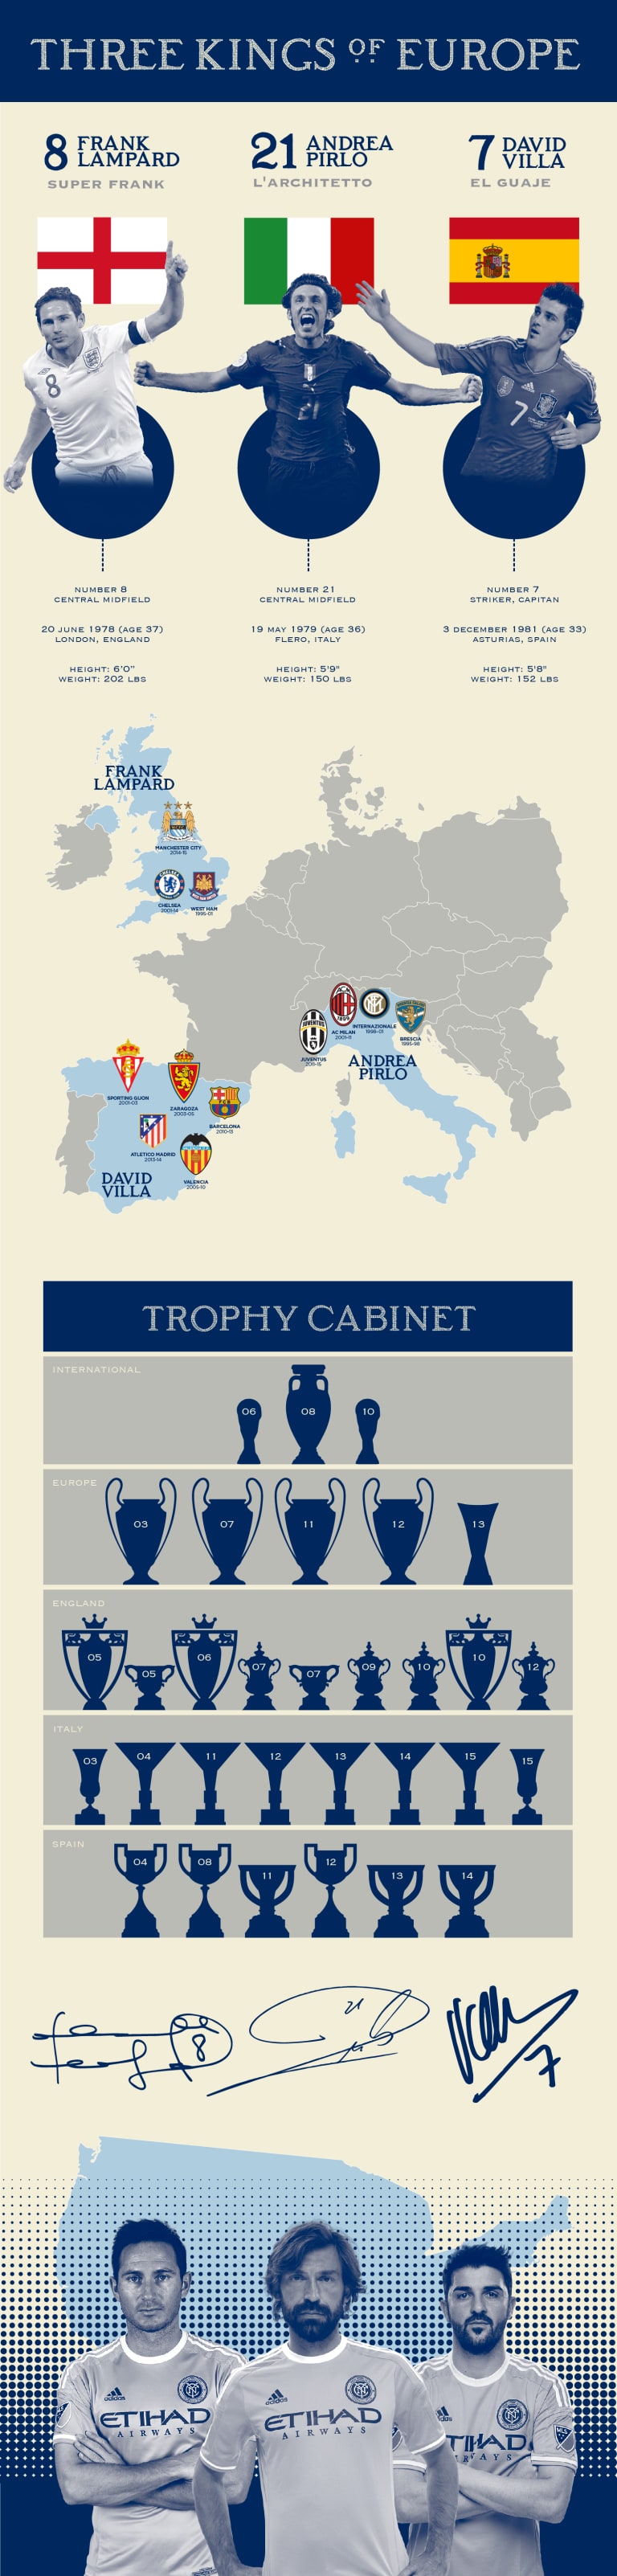 Infographic: Three Kings of Europe -